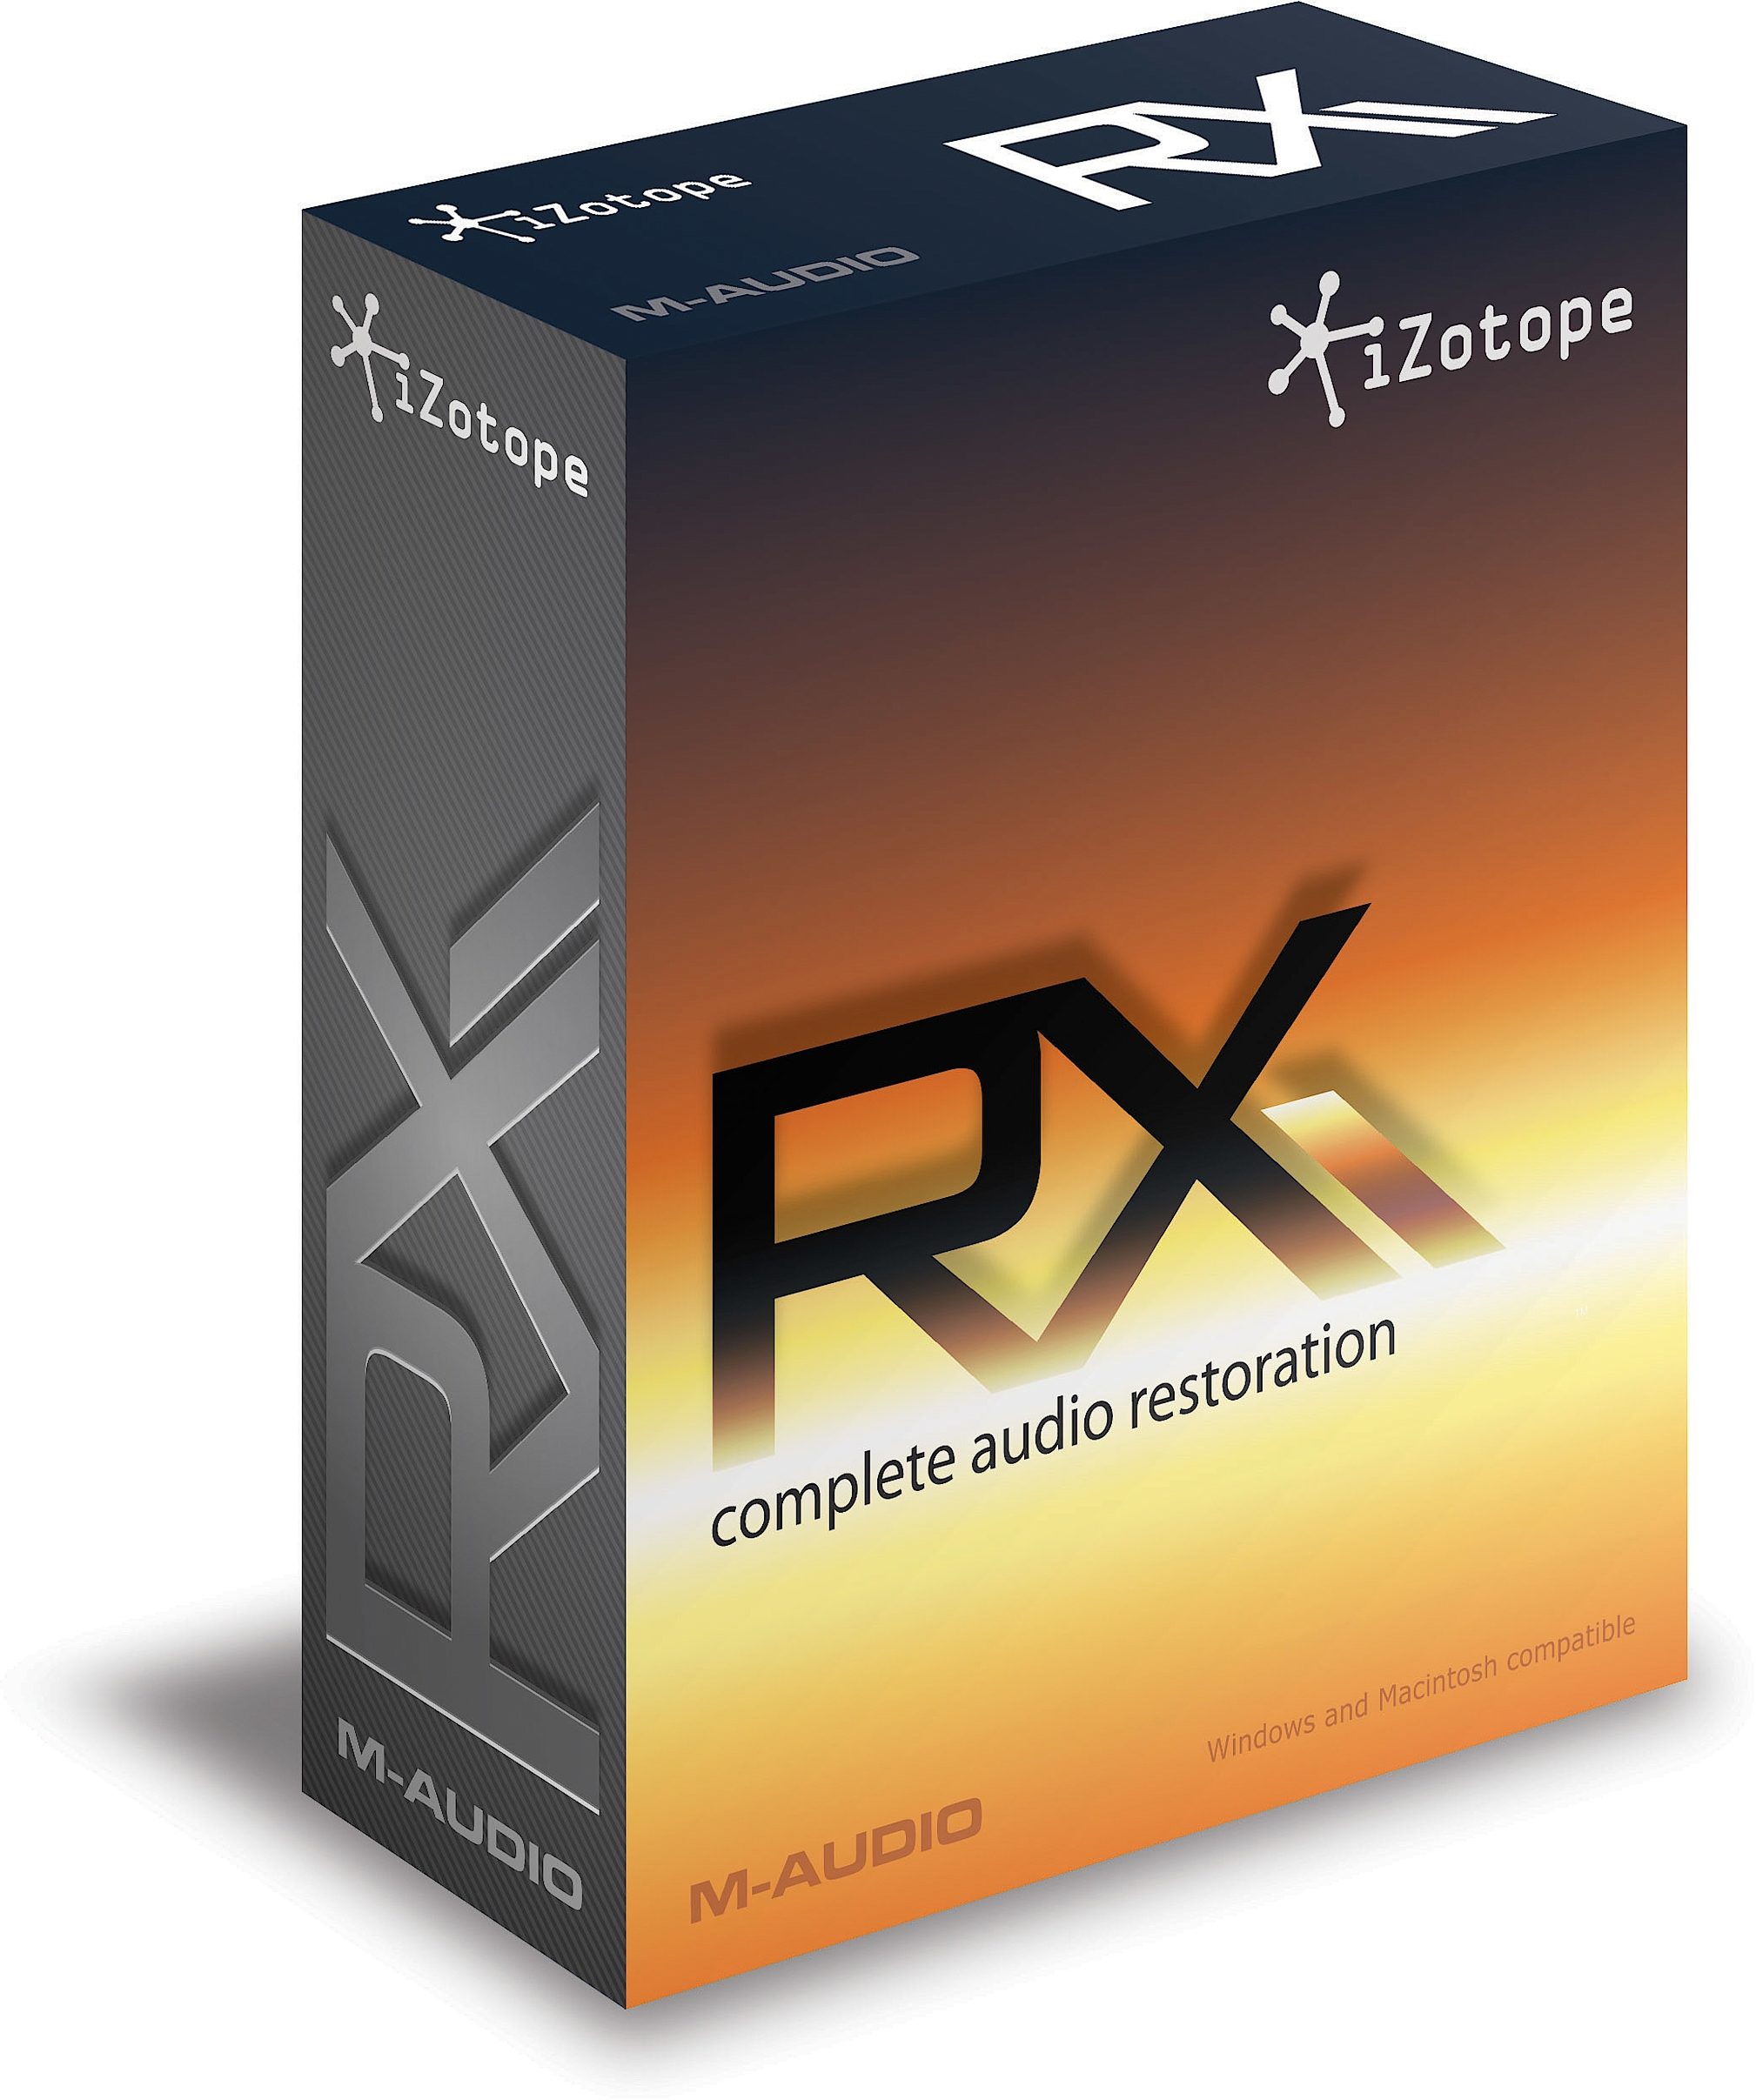 izotope rx 7 review